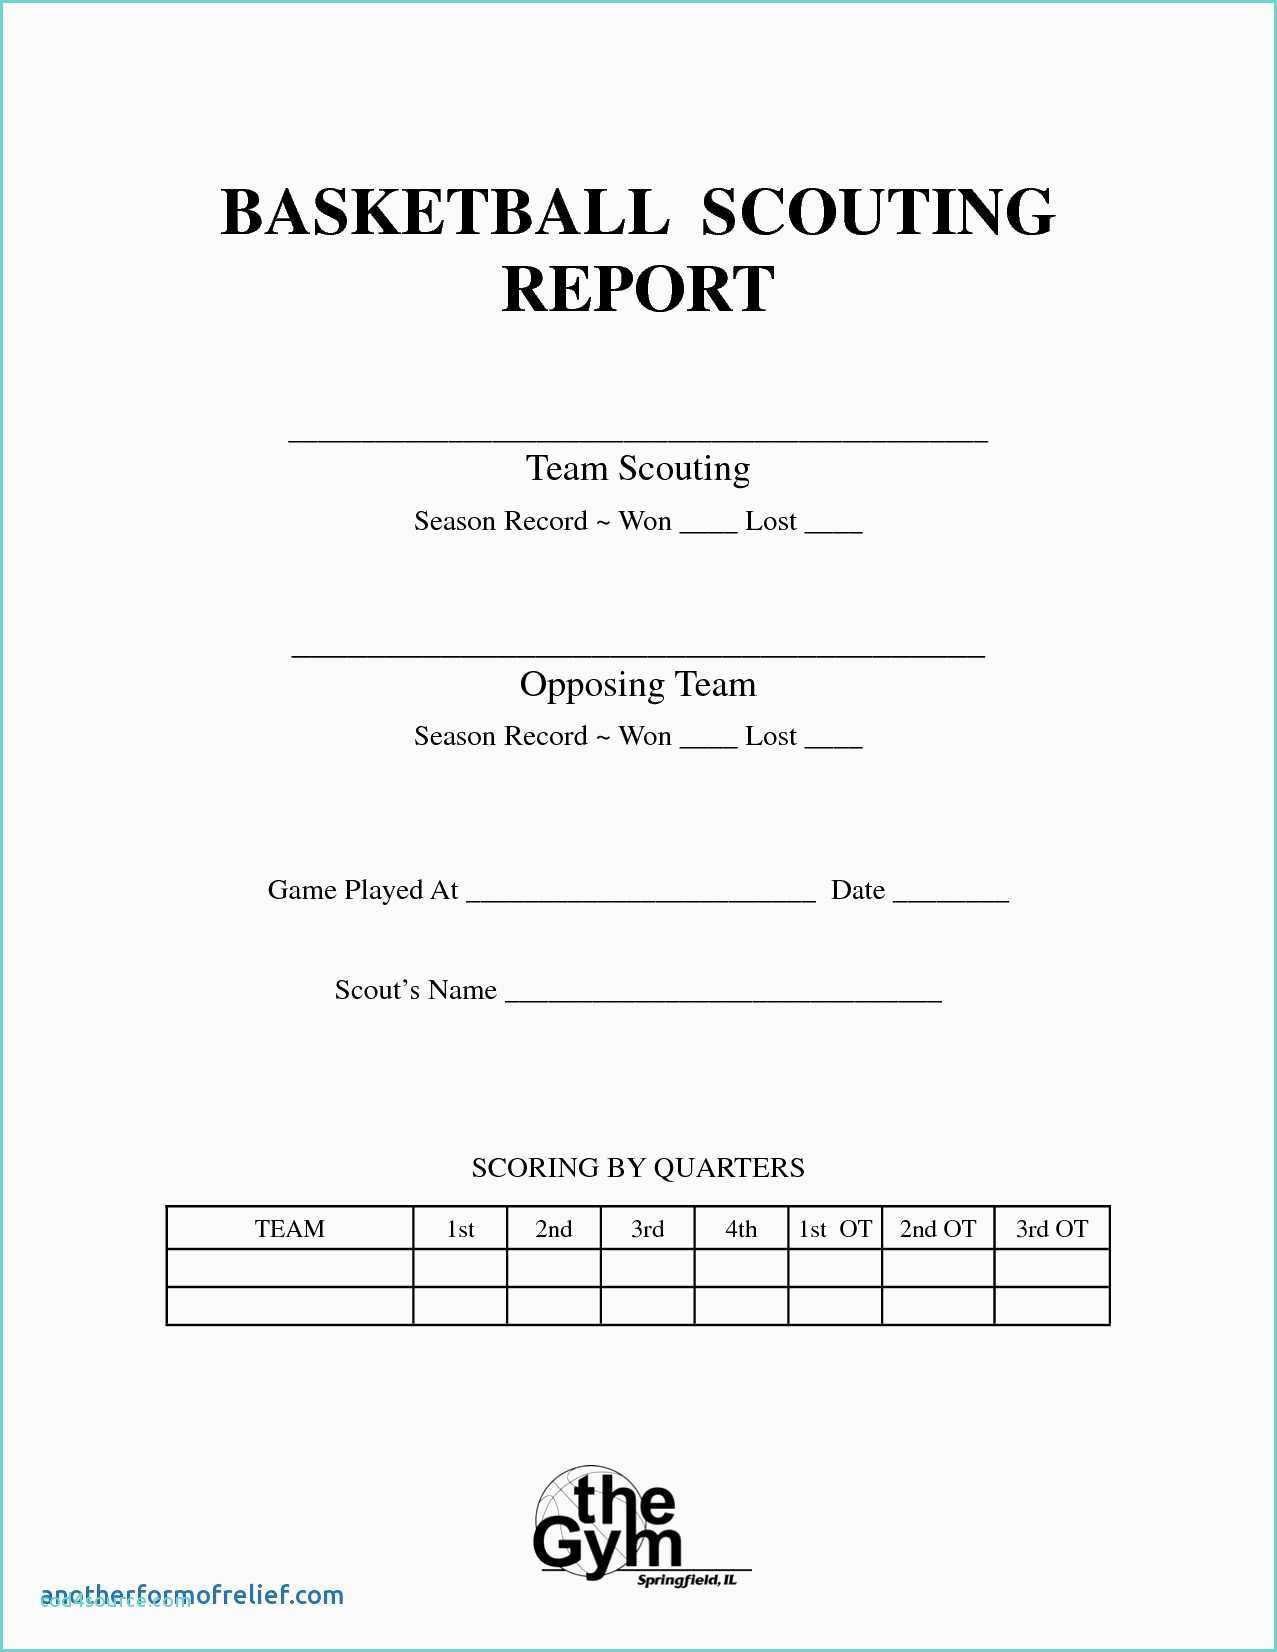 Boy Scout Tracking Spreadsheet Of Basketball Scouting Report Regarding Baseball Scouting Report Template